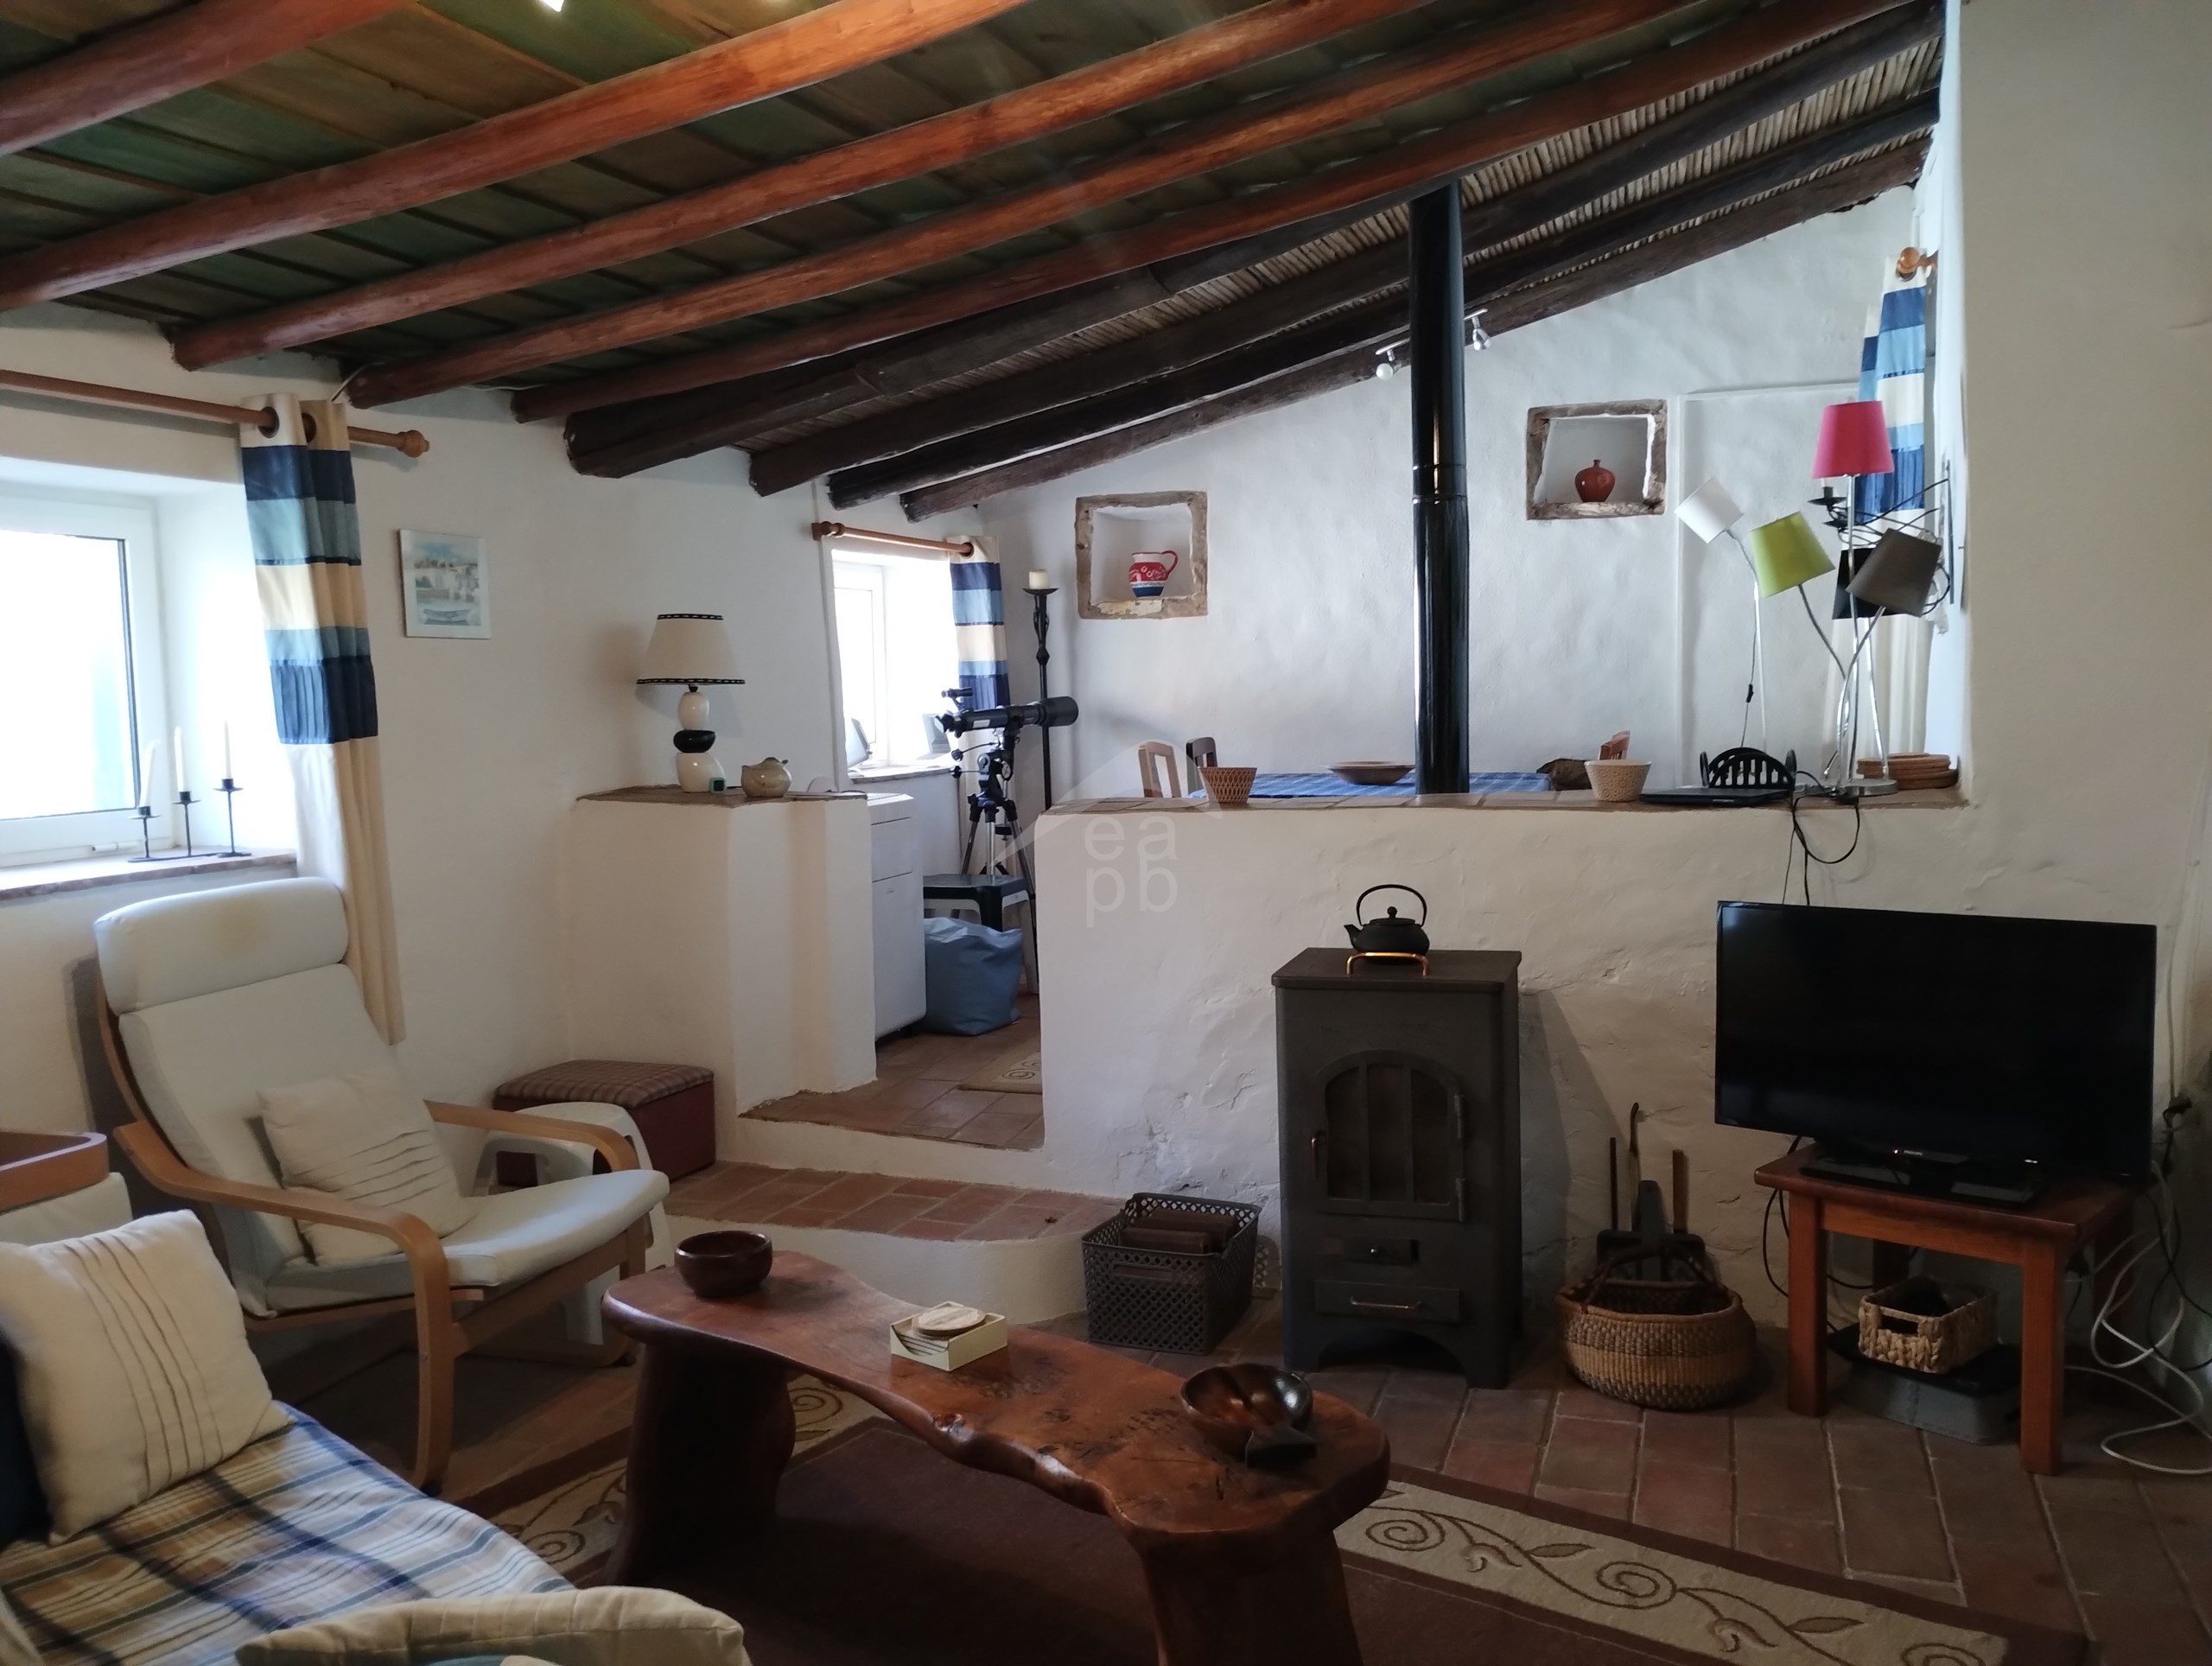 T3 Cottage with Annexe located in beautiful countryside in the hills above Tavira!